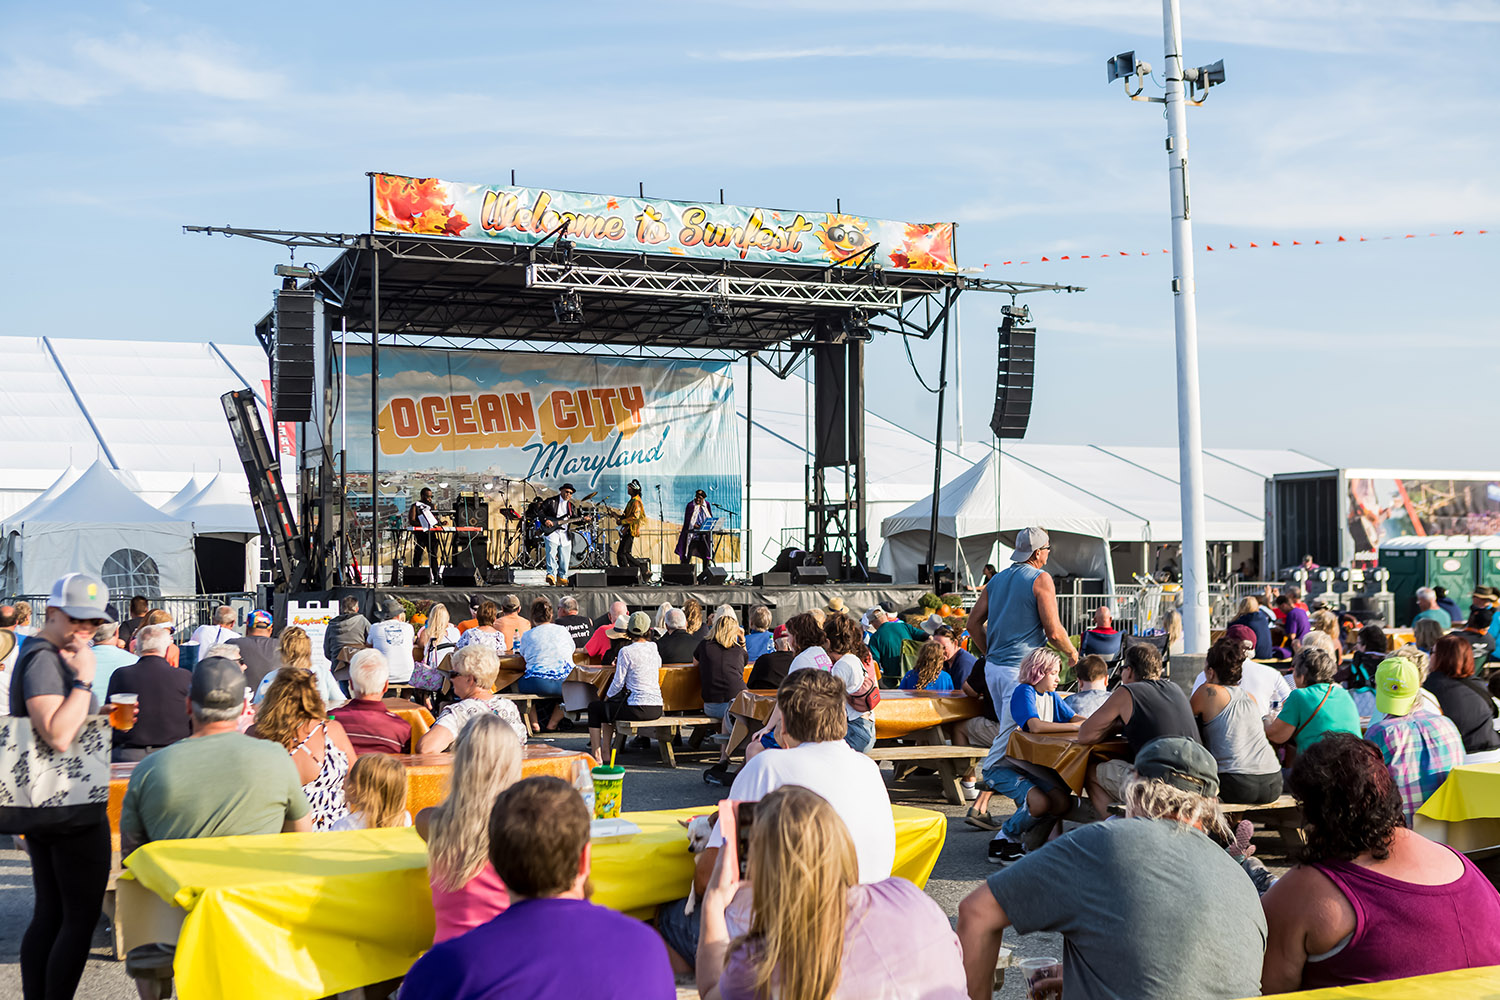 Logistics problems at other major events could push Sunfest back to October